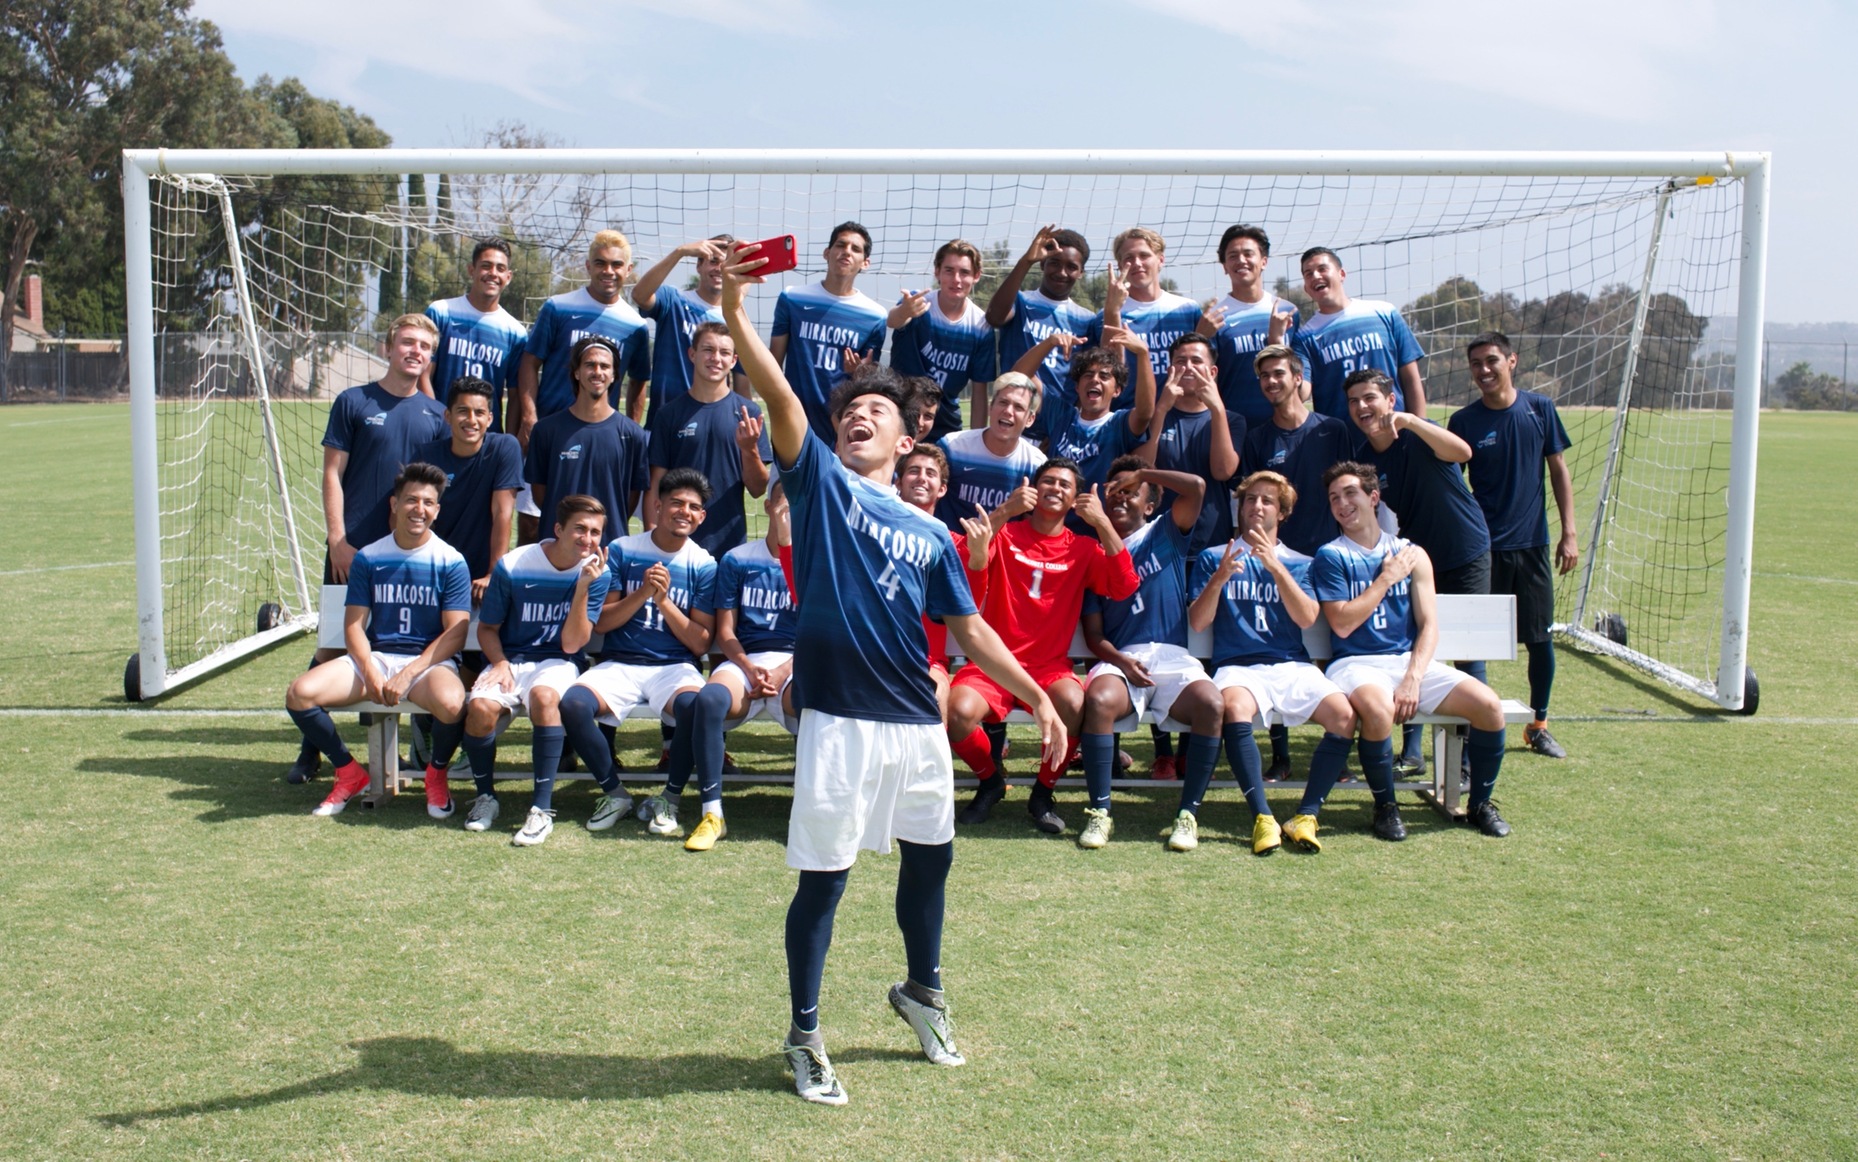 Men's Soccer team picture with Bryan Sahagun in front taking selfie with team behind him.